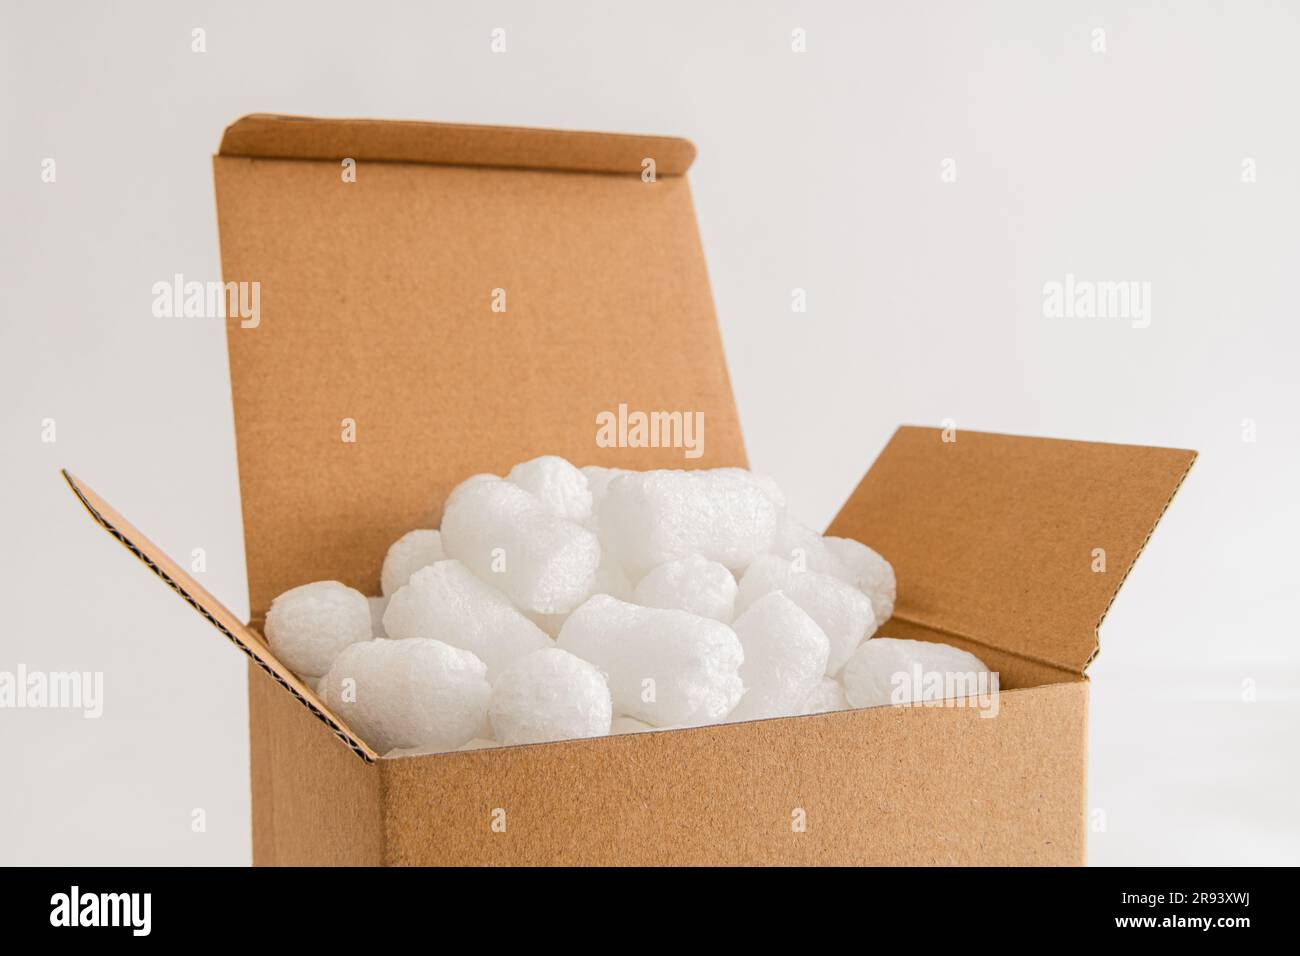 Cardboard box isolated on the white background filled with packing peanuts Stock Photo